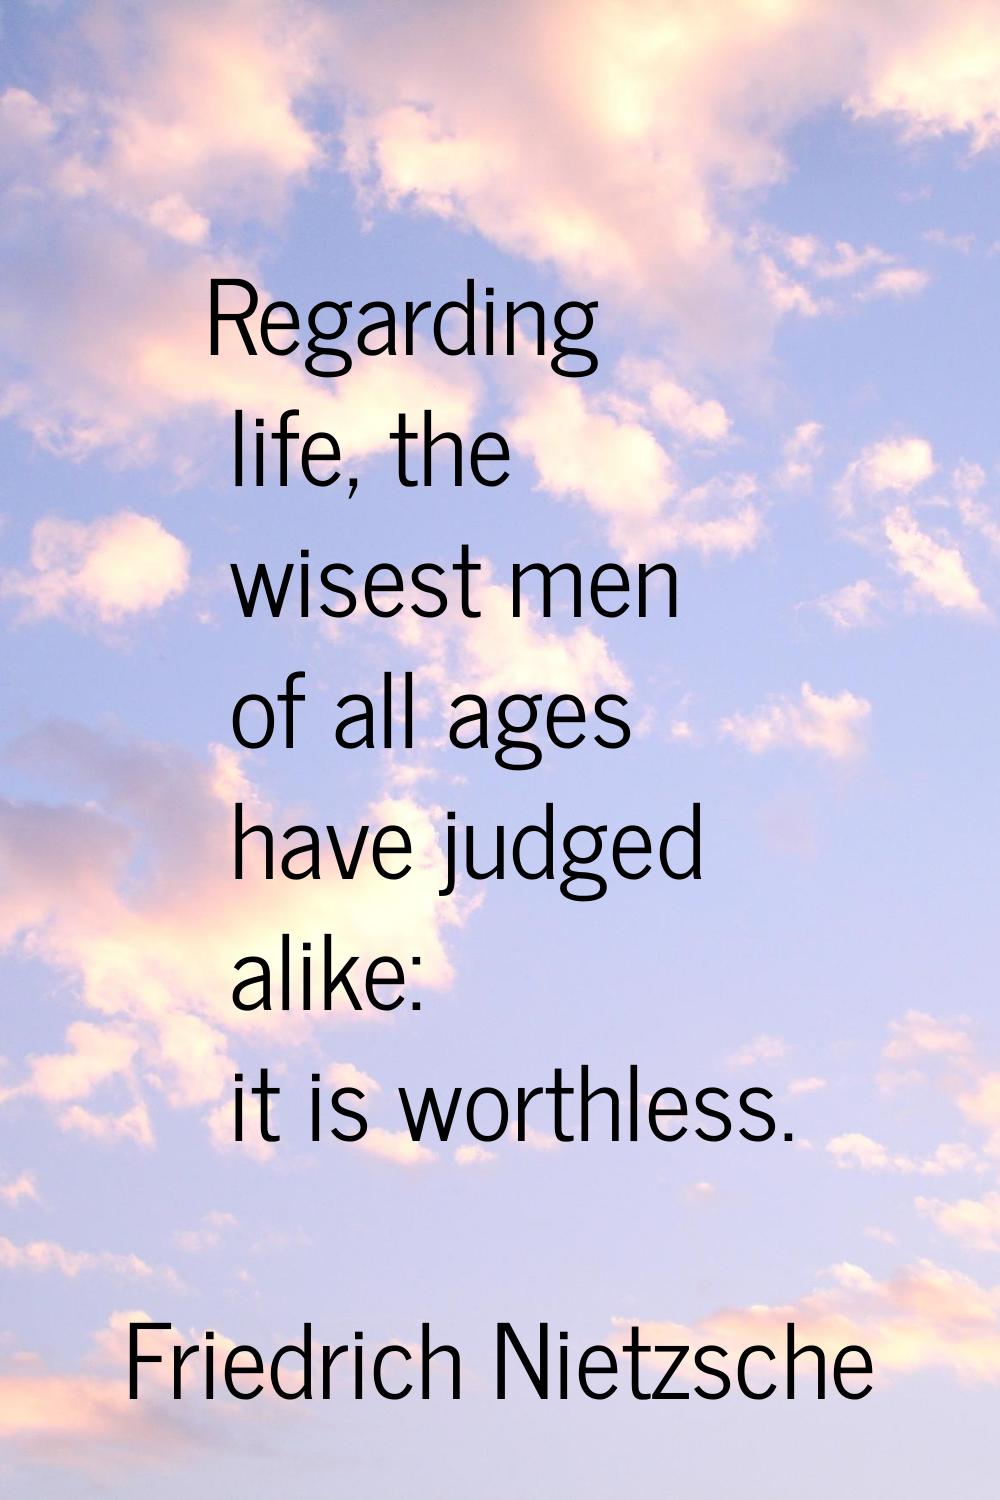 Regarding life, the wisest men of all ages have judged alike: it is worthless.